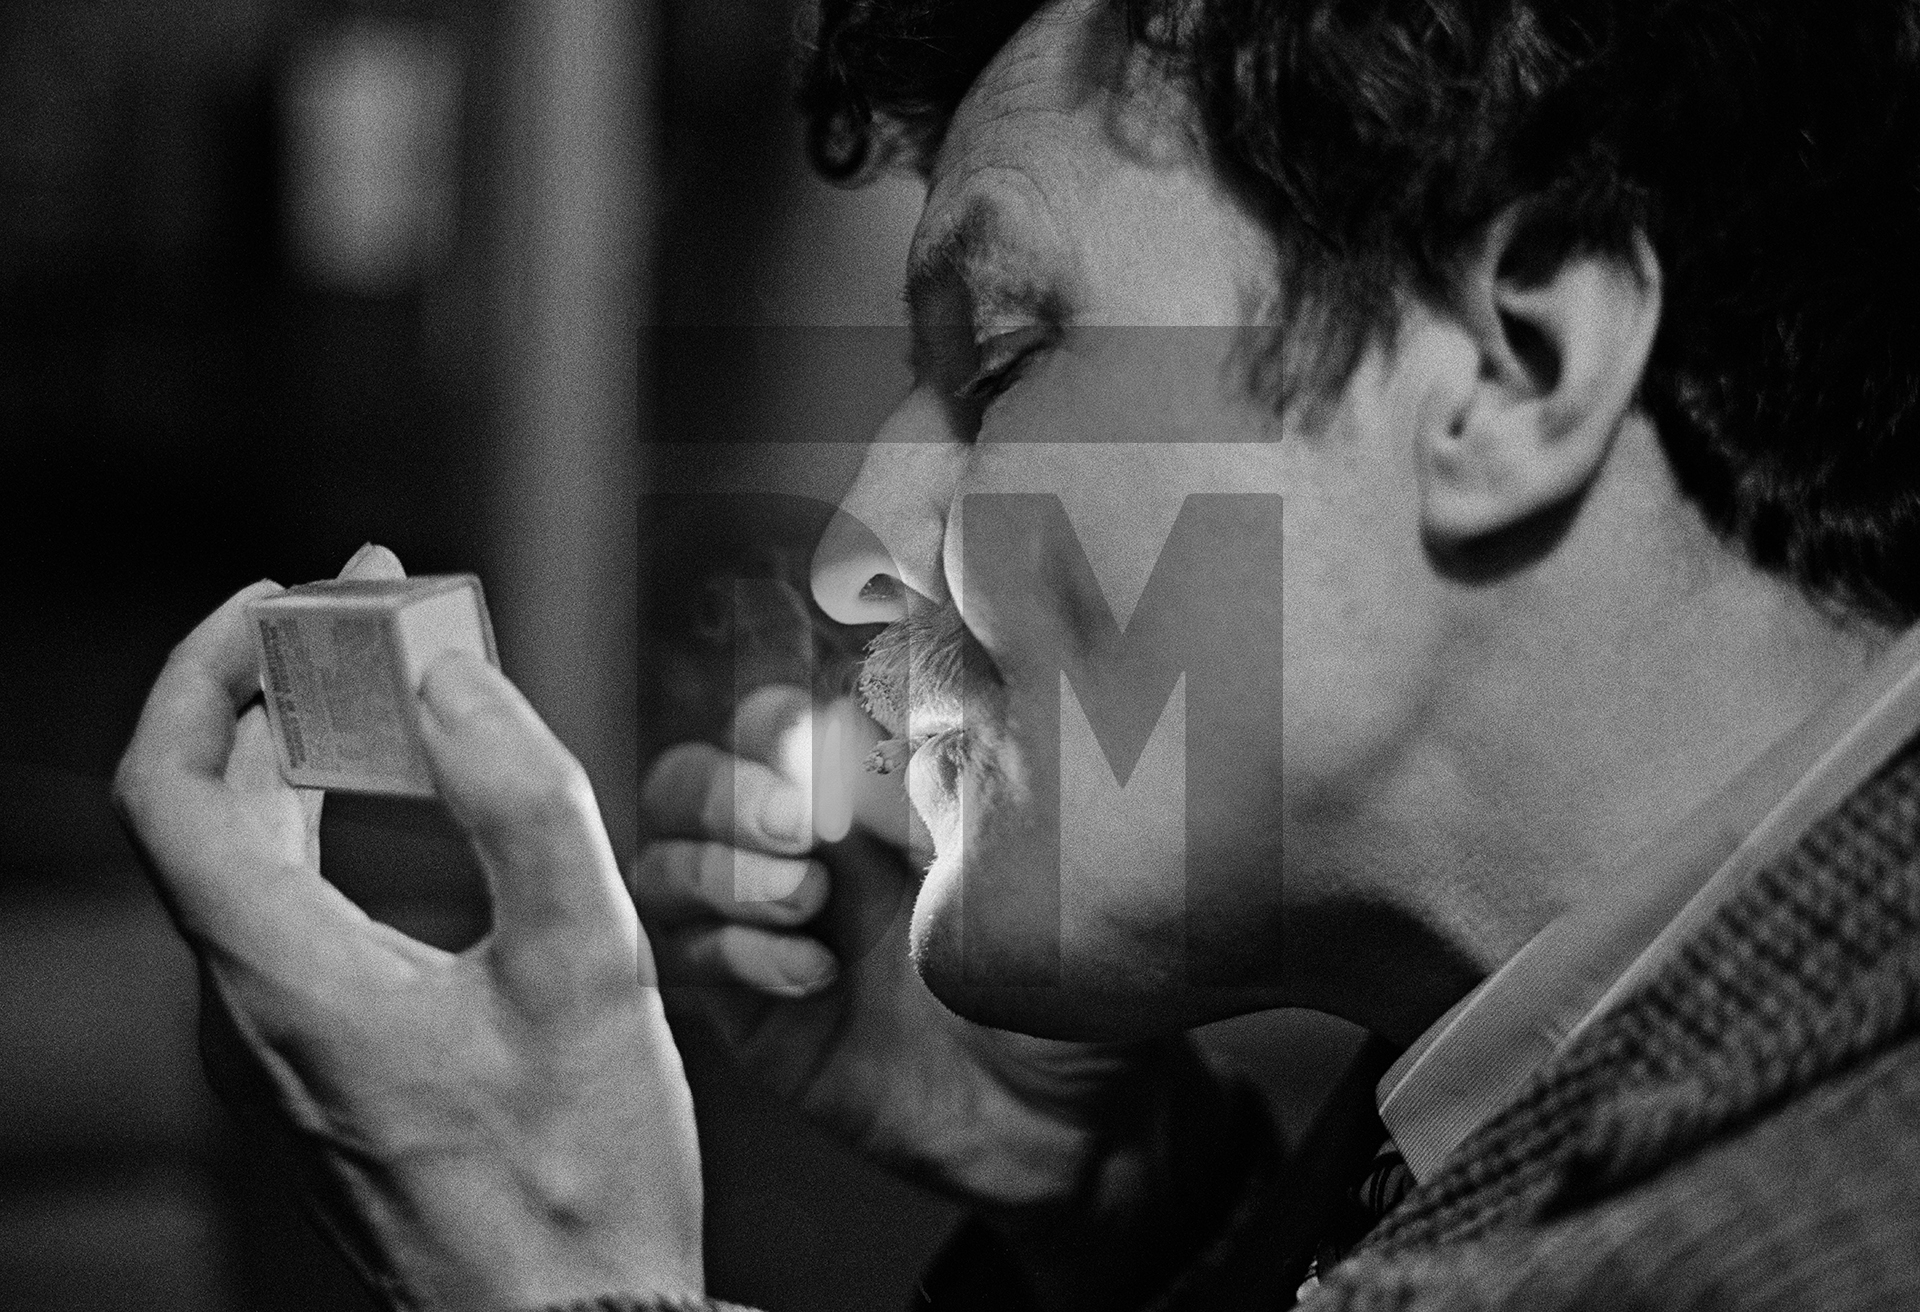 Arthur Shaw, aged 56 once an apprentice brass finisher who was admitted in 1943, lights the stub of a cigarette. He holds mumbled conversations with green men he sees on the walls and he steals other people’s tokens. February 1978 by Daniel Meadows